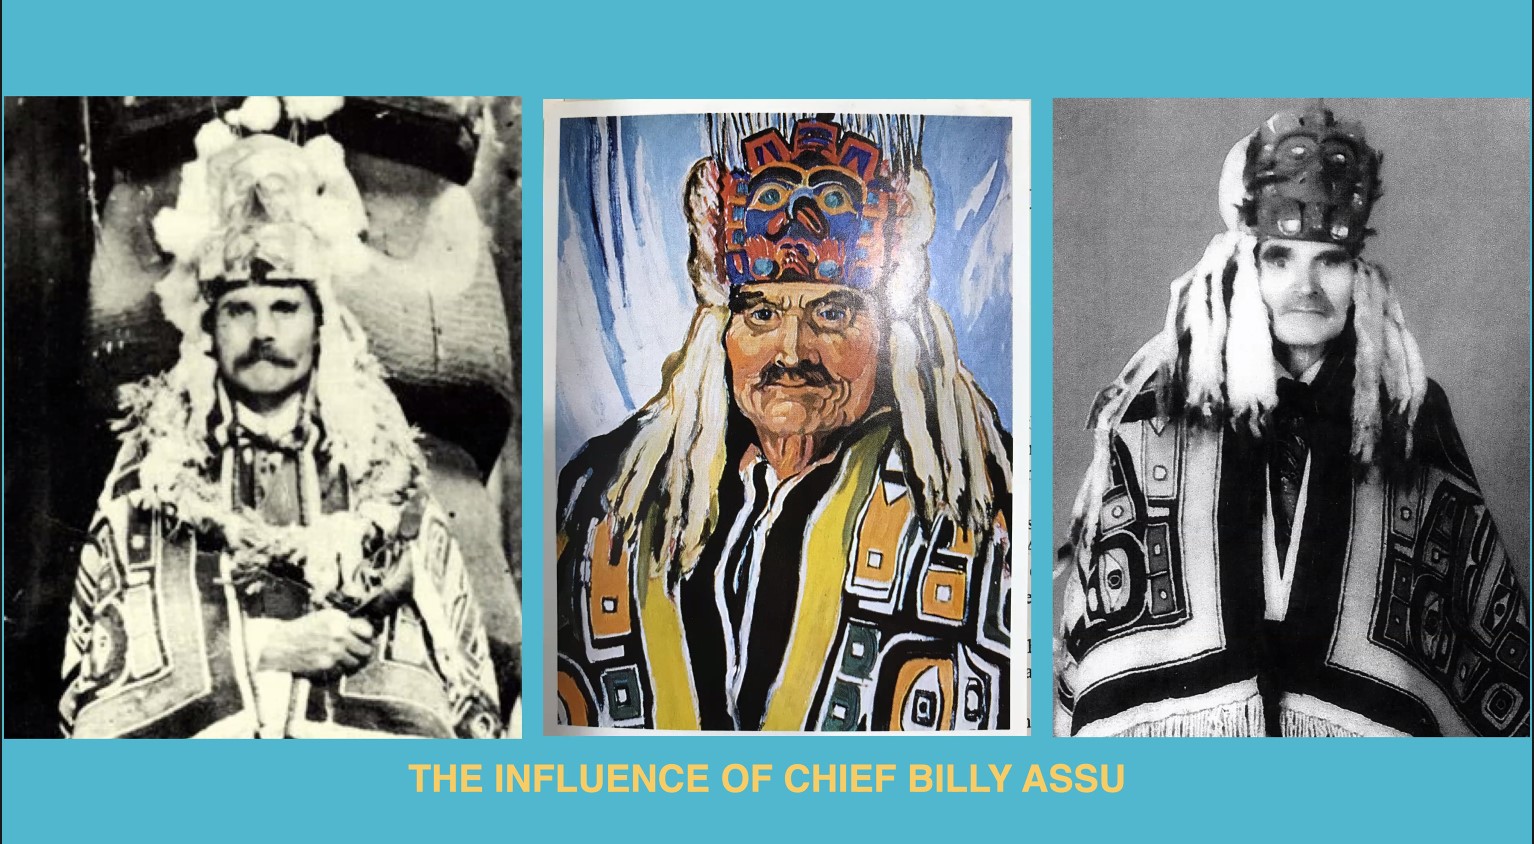 Pictures of chief Billy Assu